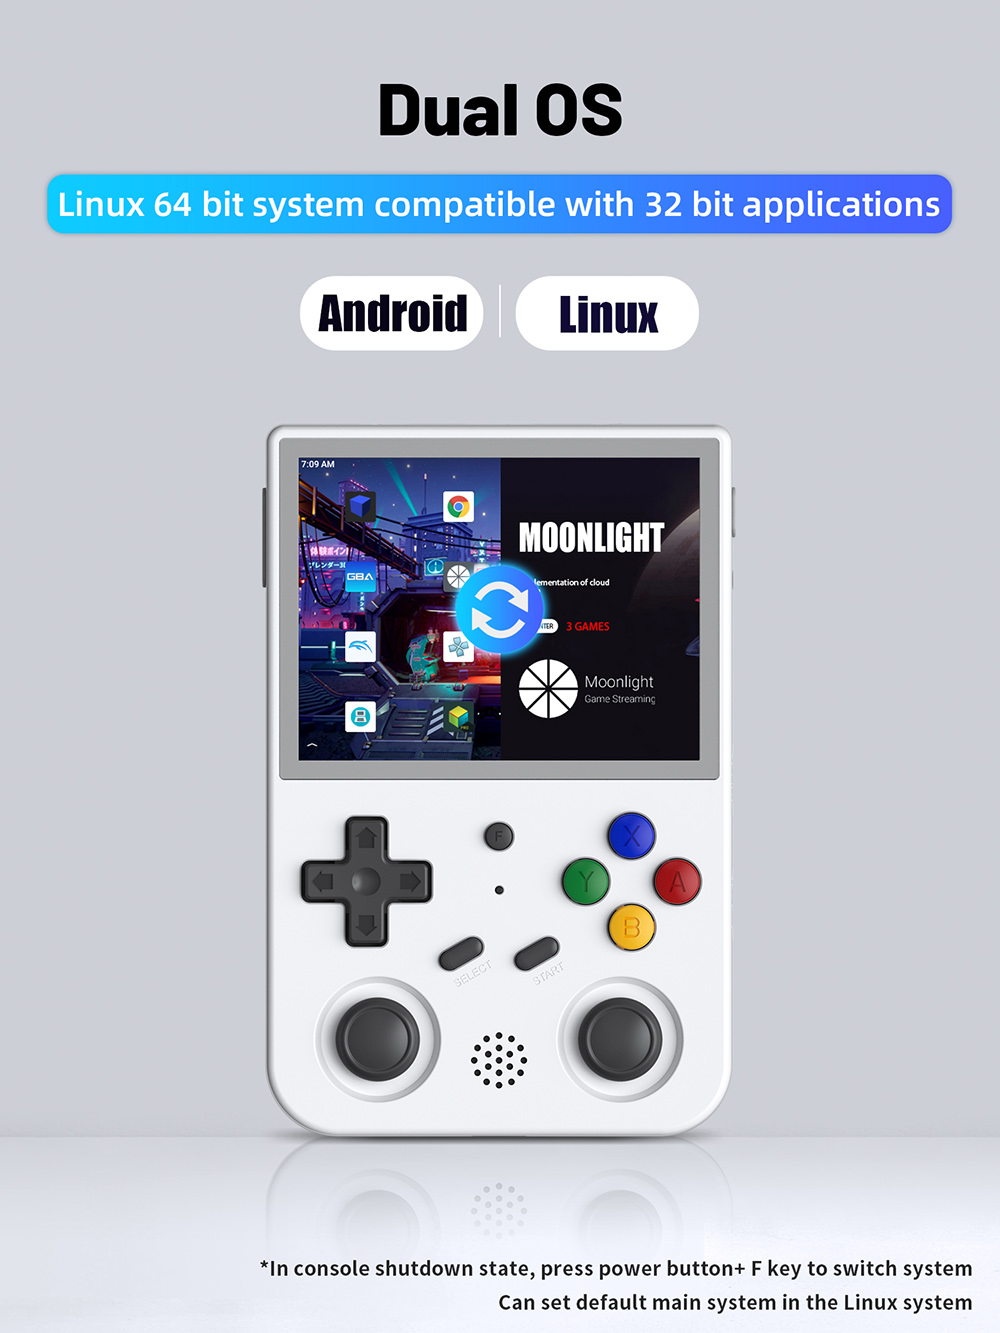 ANBERNIC RG353V Portable Game Console Android 32GB eMMC+16GB Linux+256GB Game TF Card 3.5'' IPS Retro WiFi Bluetooth